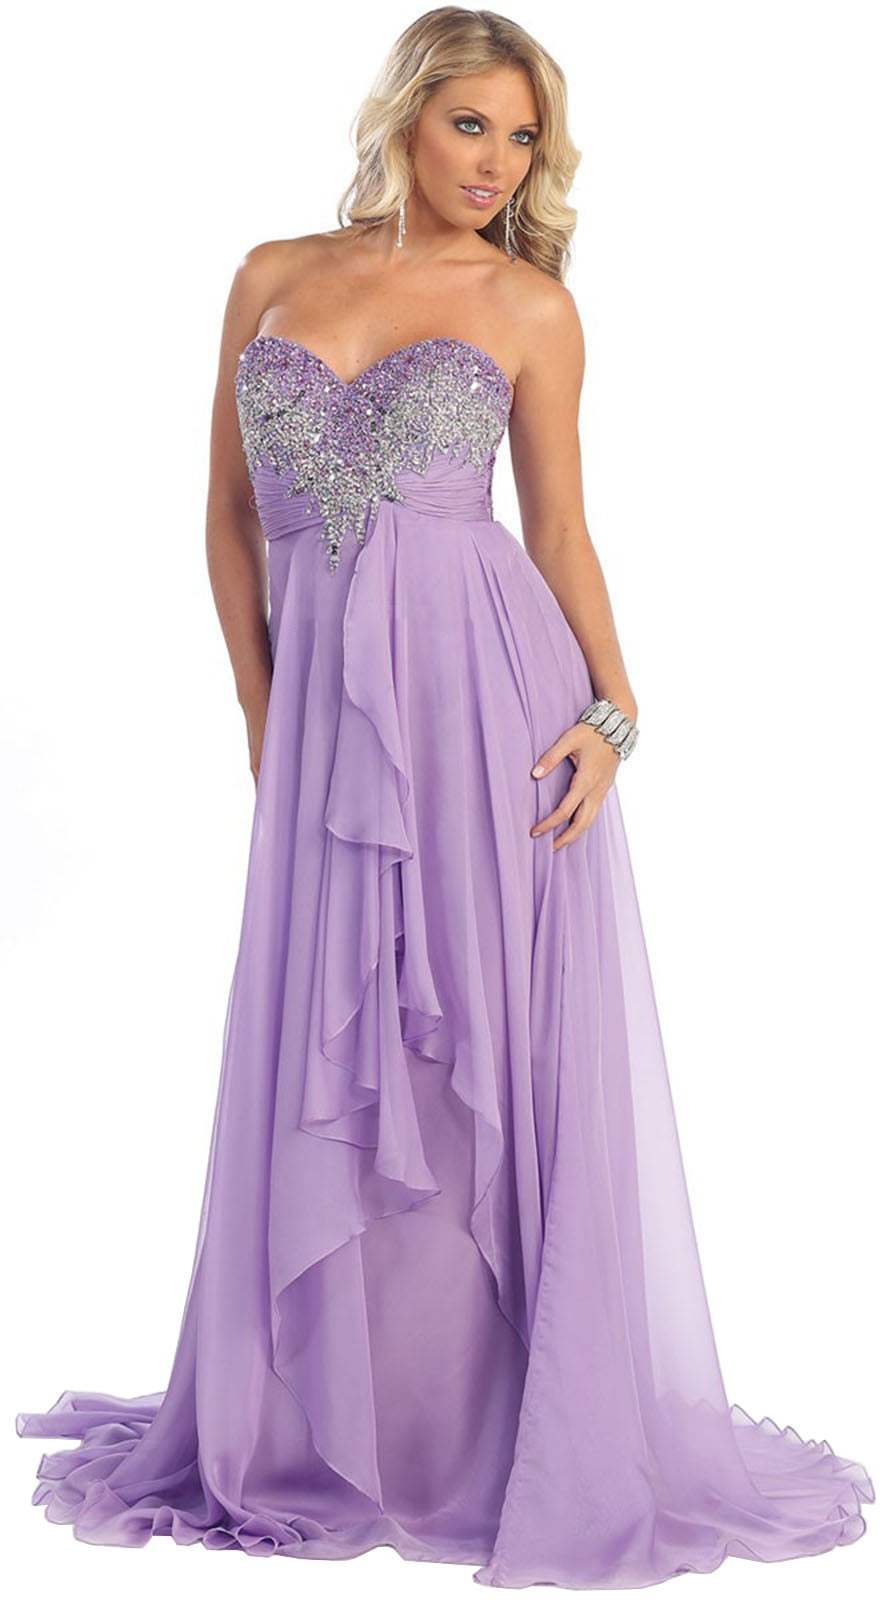 Formal Dress Shops - FLOWY FLOOR SWEEPING PROM EVENING GOWN & PLUS SIZE ...